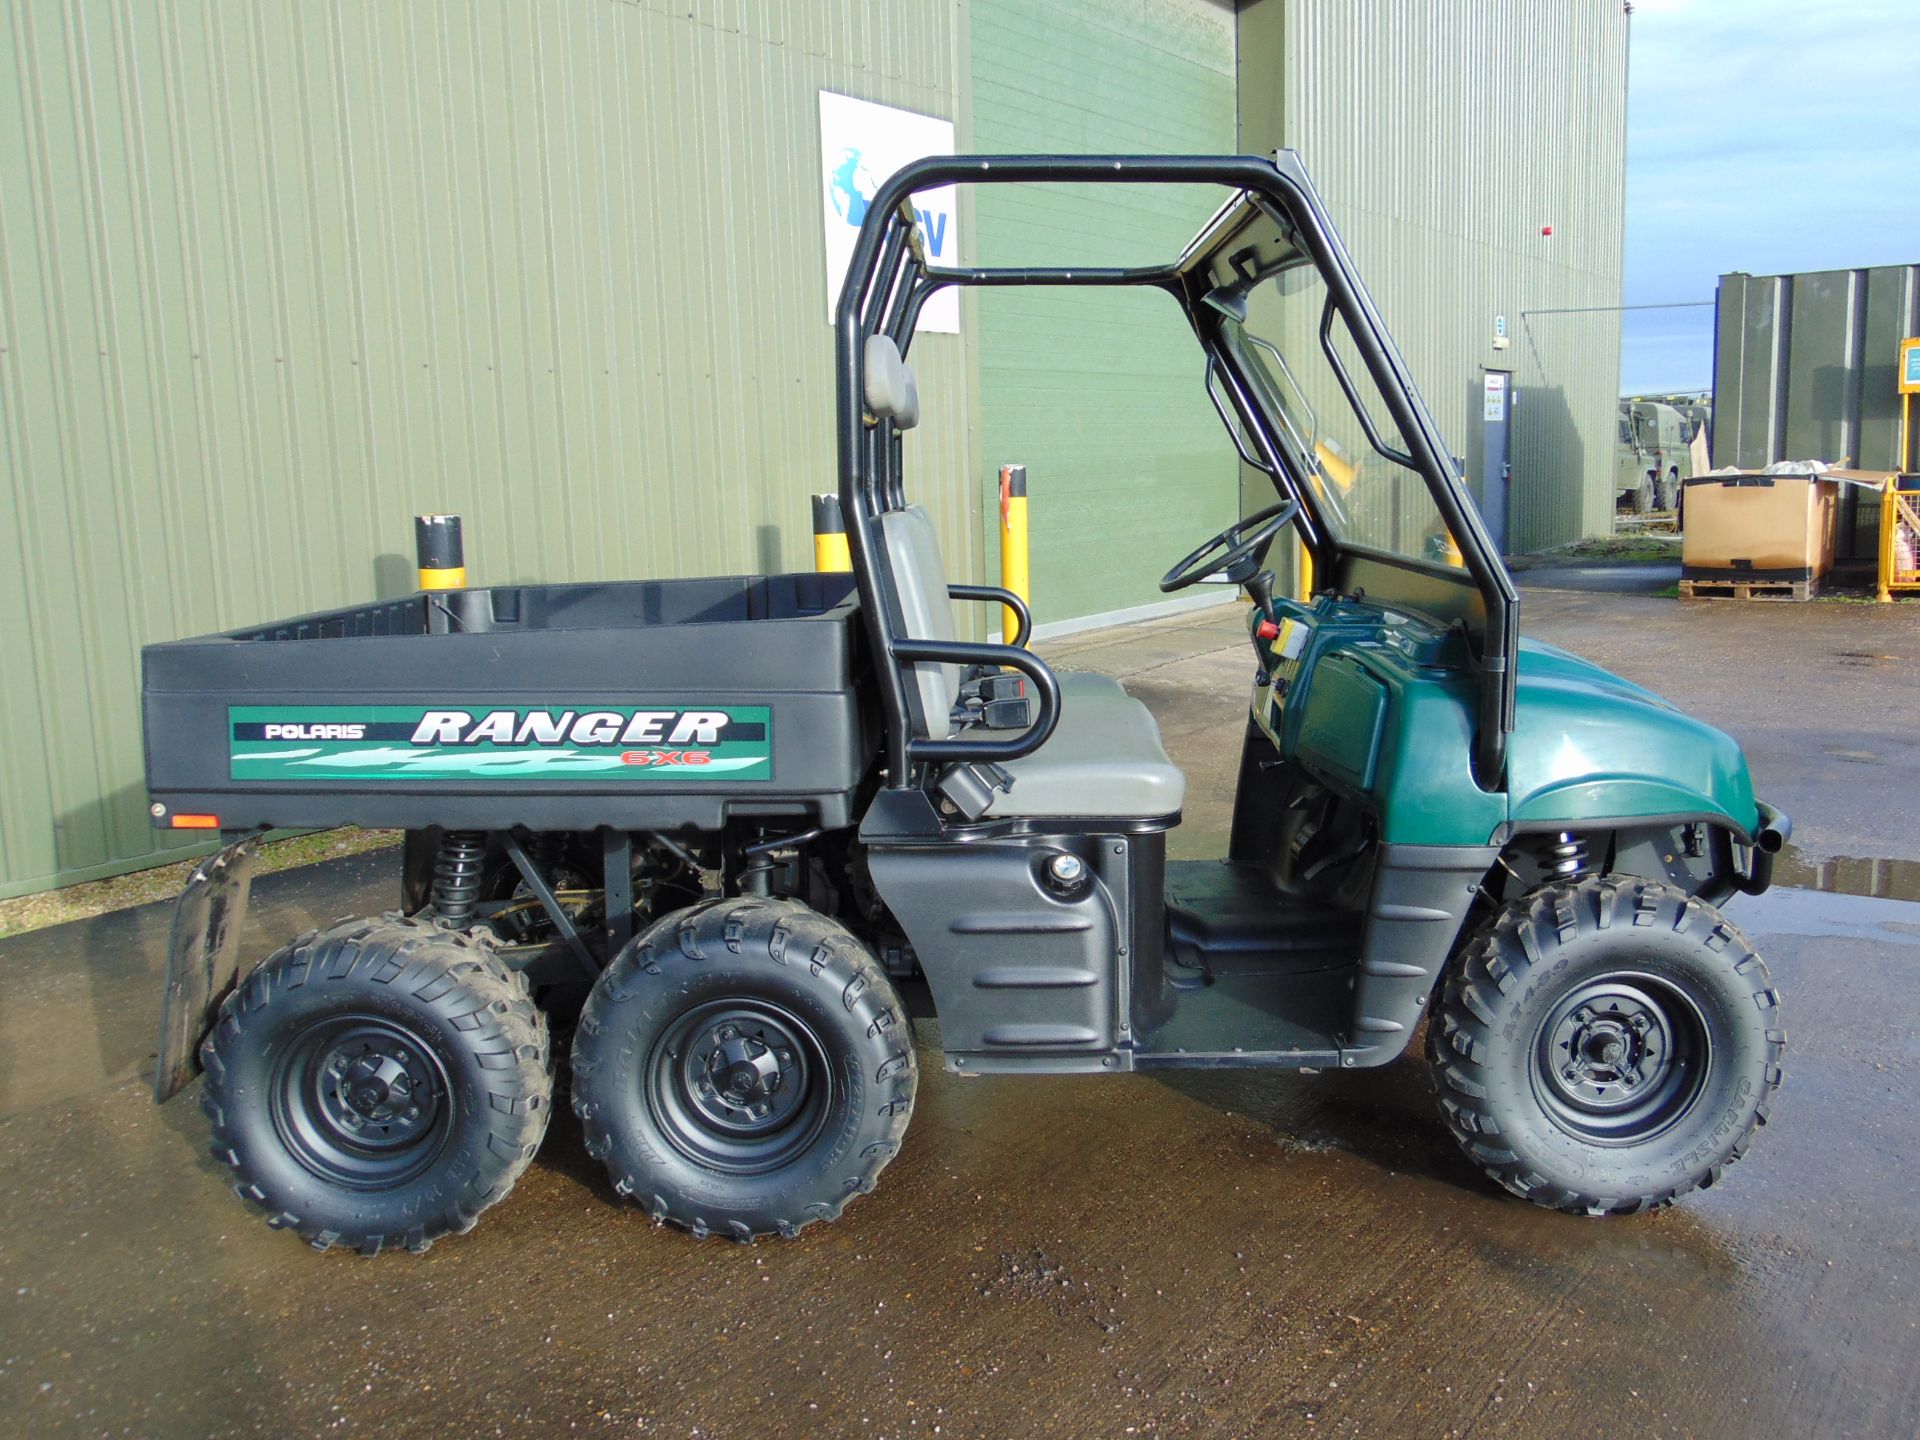 Polaris 6x6 800 EFI Ranger Utility Vehicle ONLY 280 HOURS from Govt Dept - Image 3 of 19